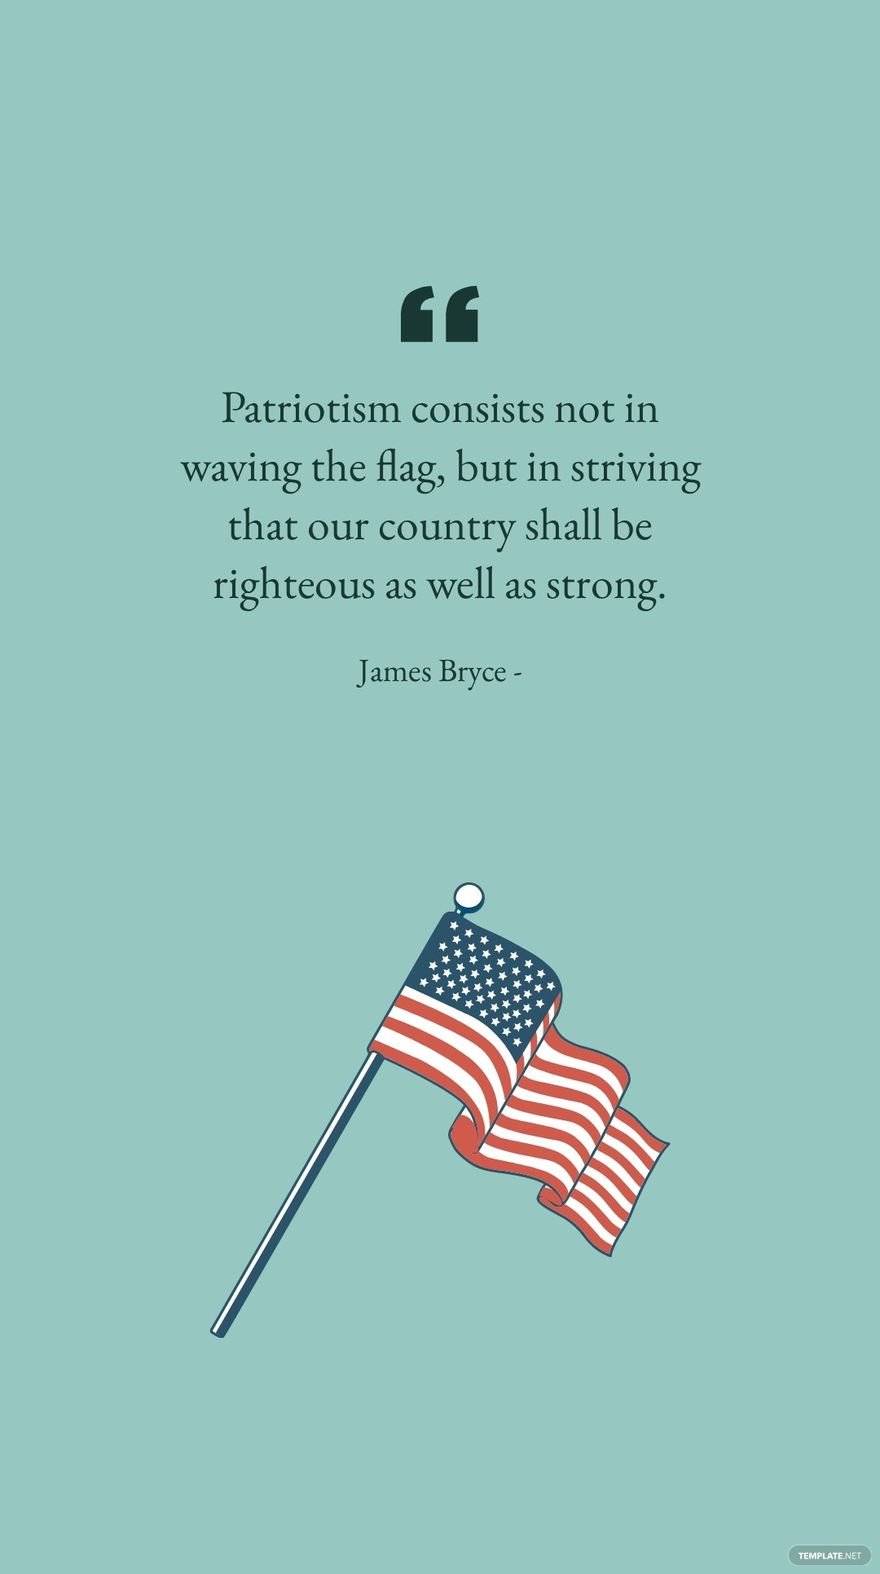 Free James Bryce - Patriotism consists not in waving the flag, but in striving that our country shall be righteous as well as strong. in JPG